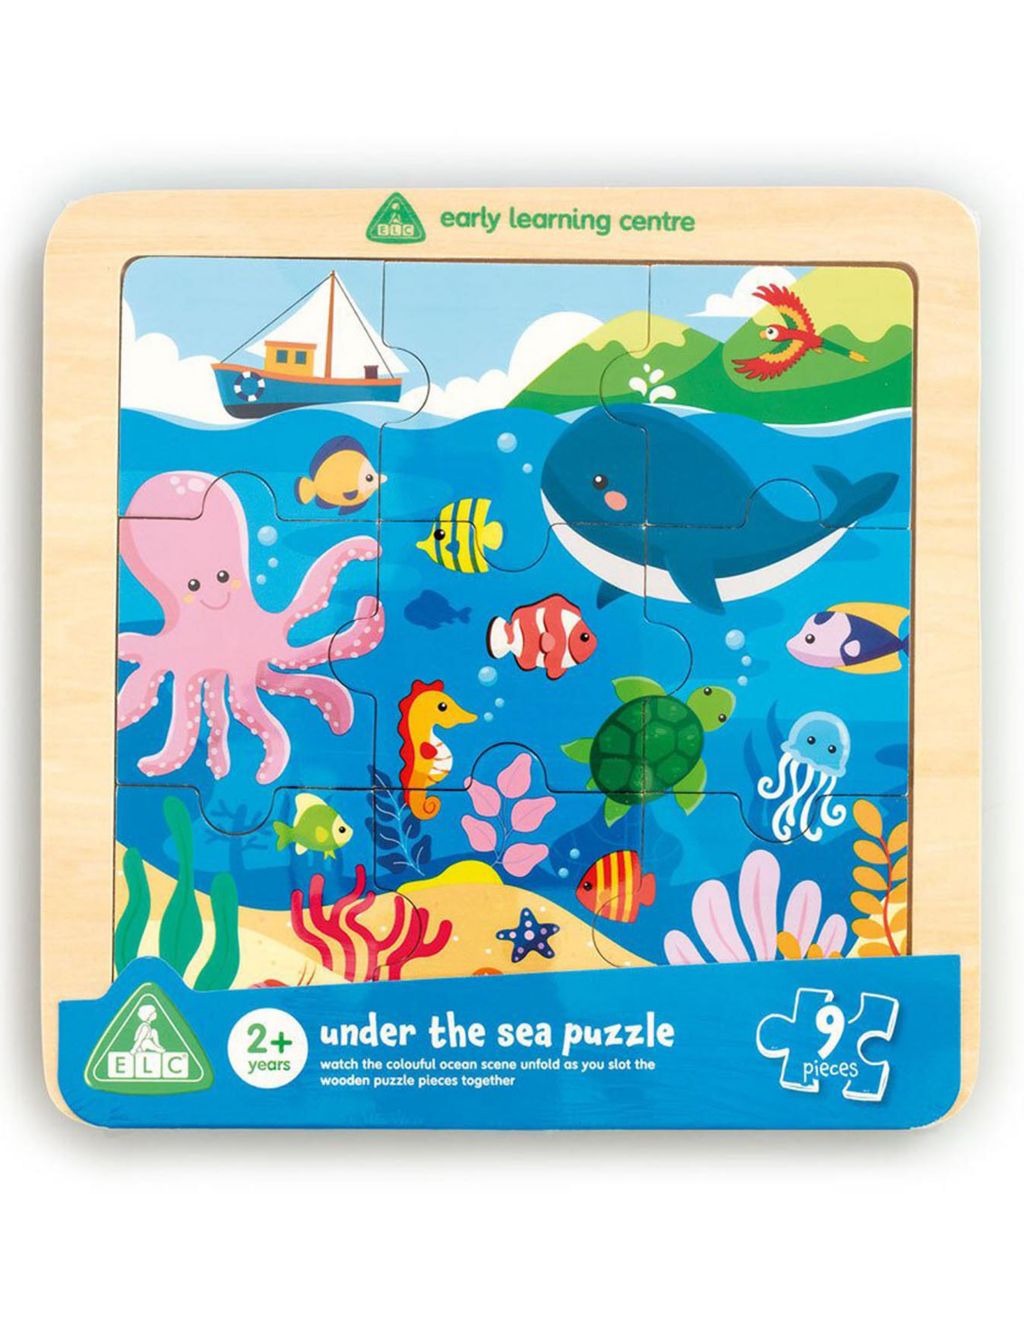 Under the Sea Puzzle (2+ Yrs) image 1